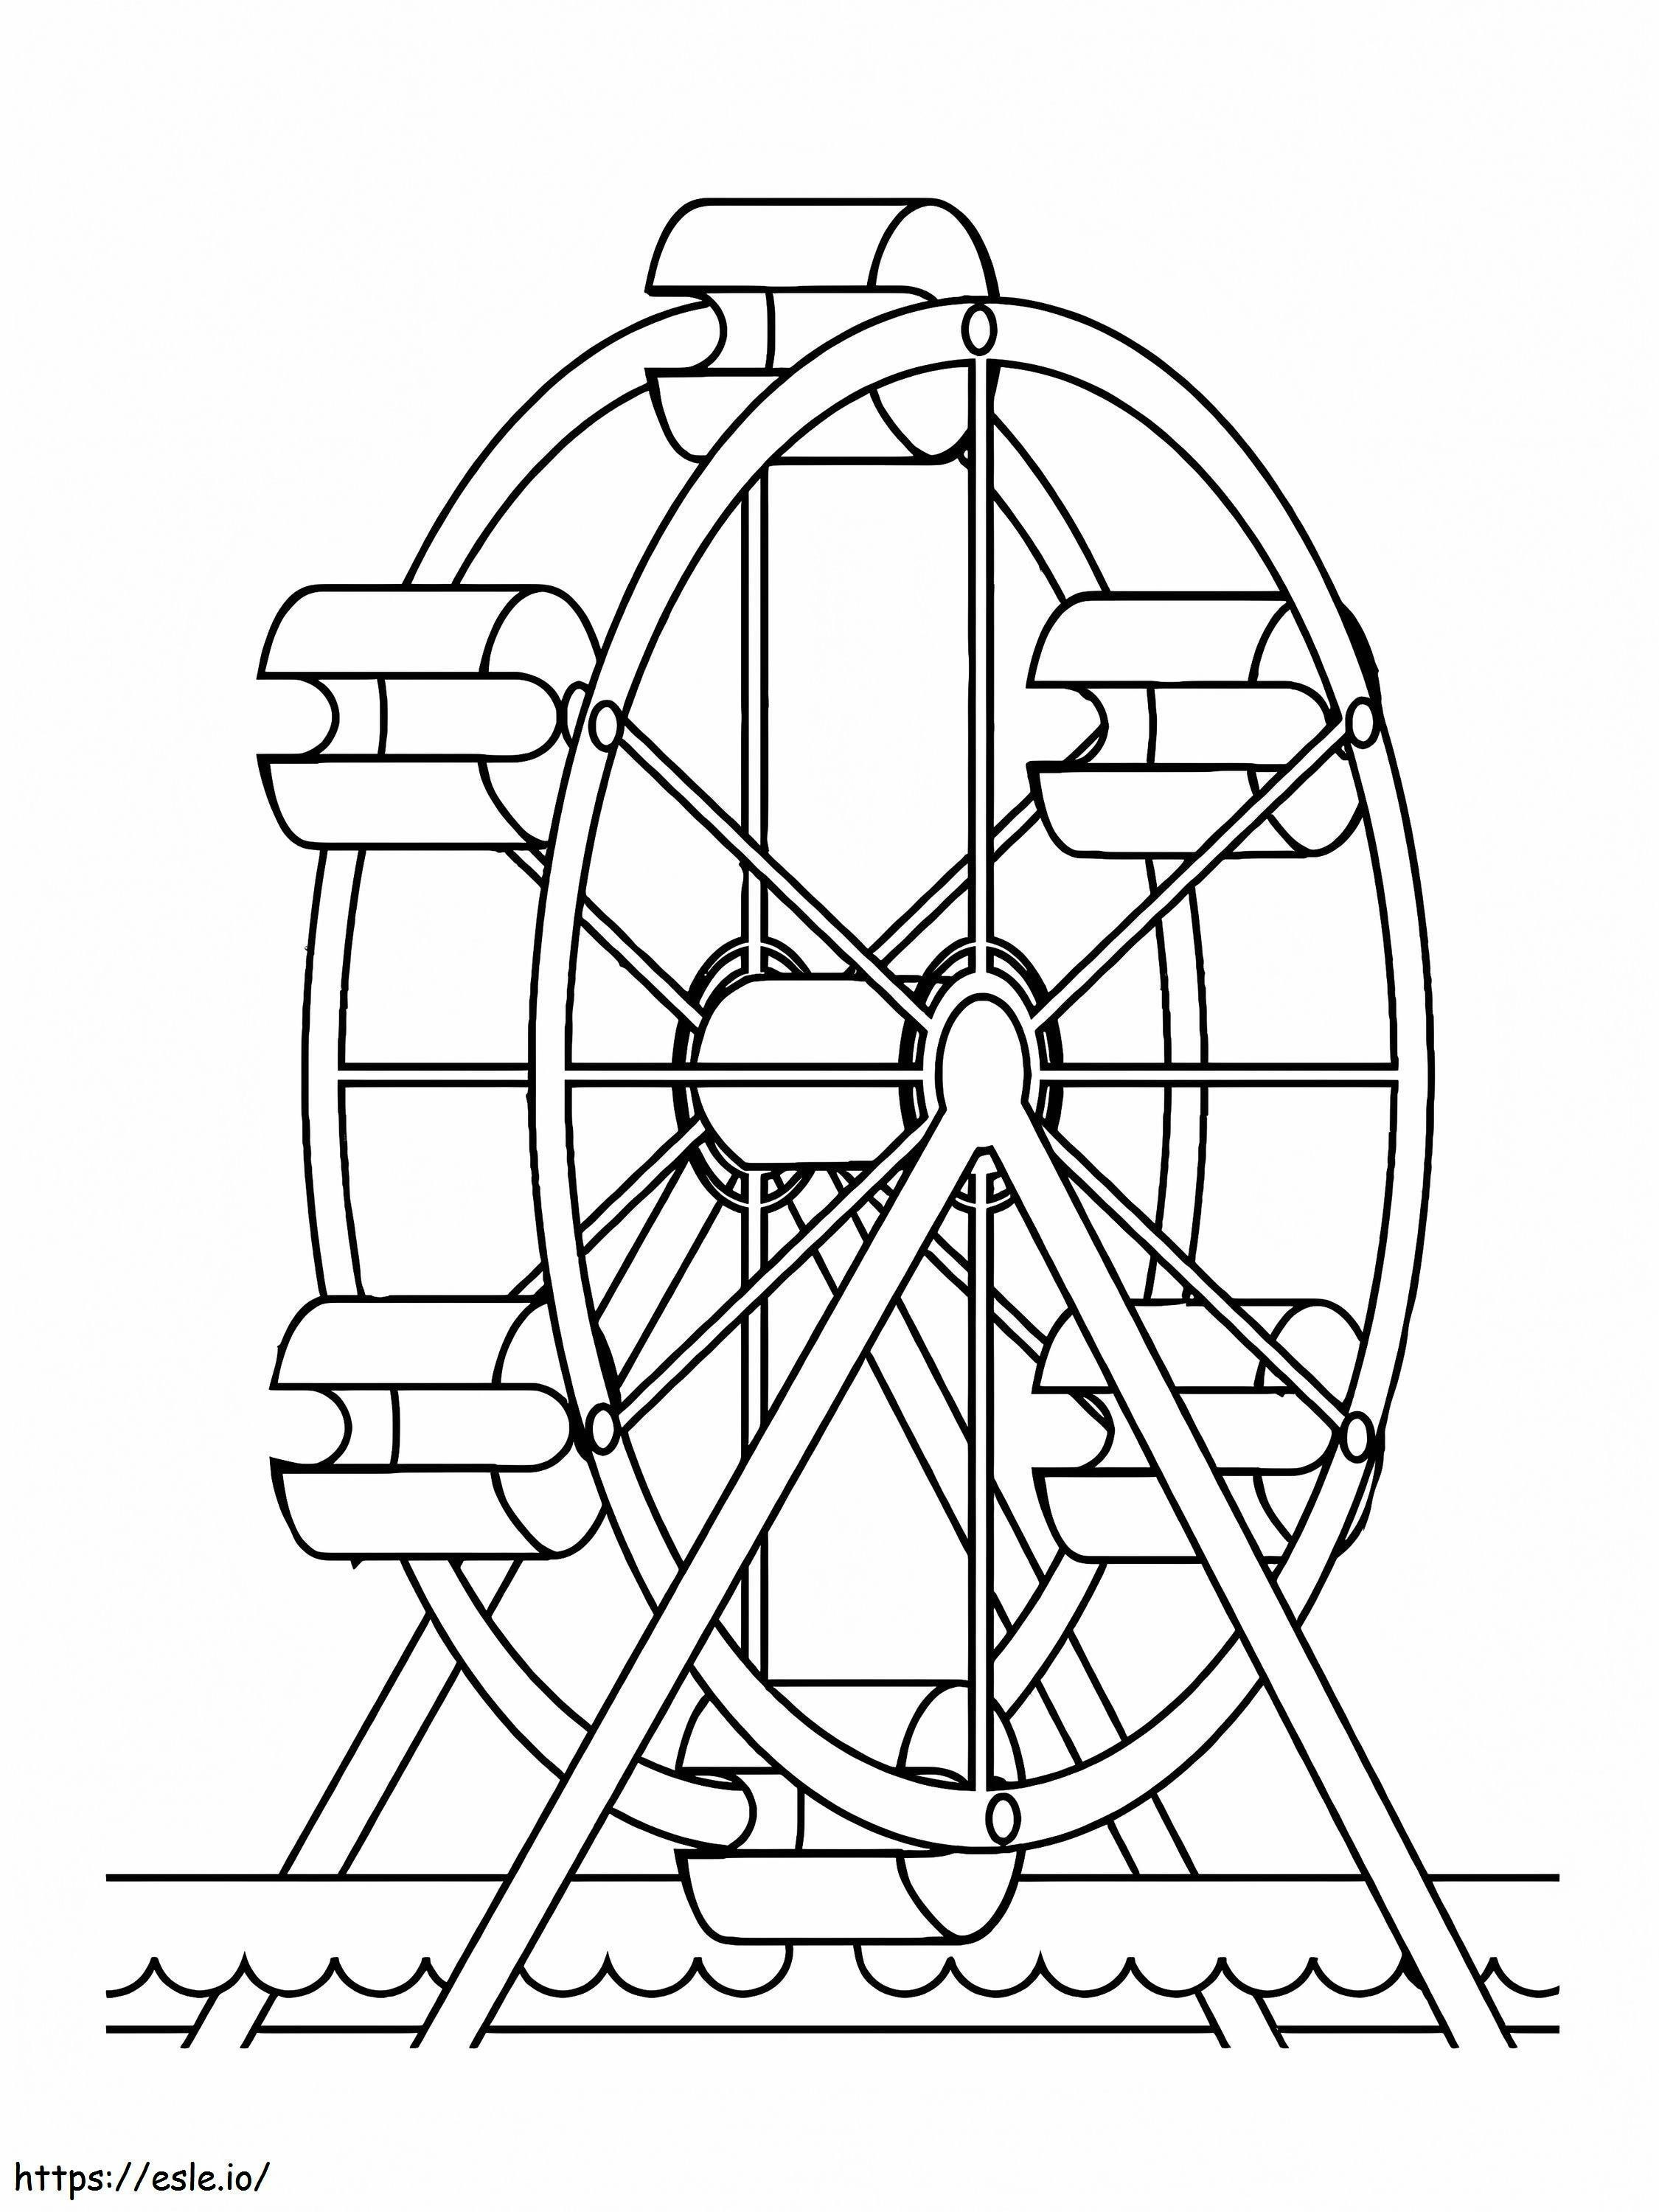 Ferris Wheel 2 coloring page